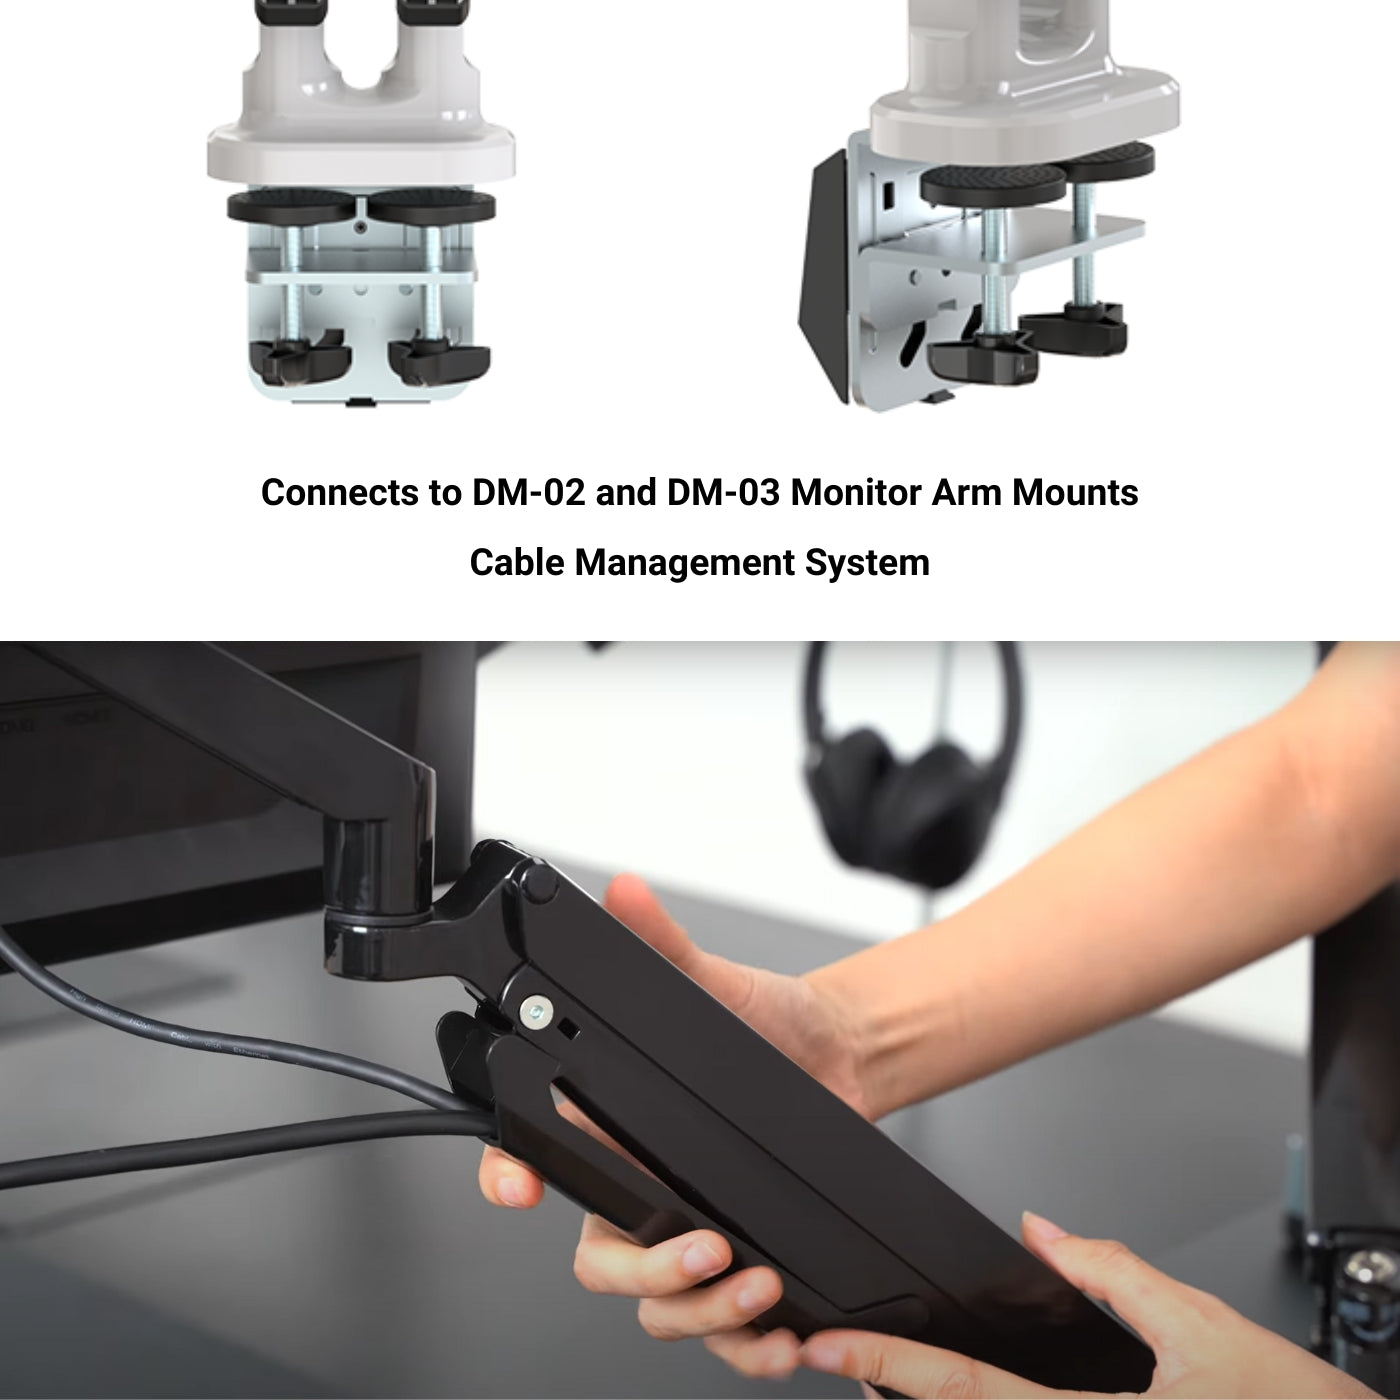 Dual Monitor Arm with a Removable Laptop Mount – Progressive Desk